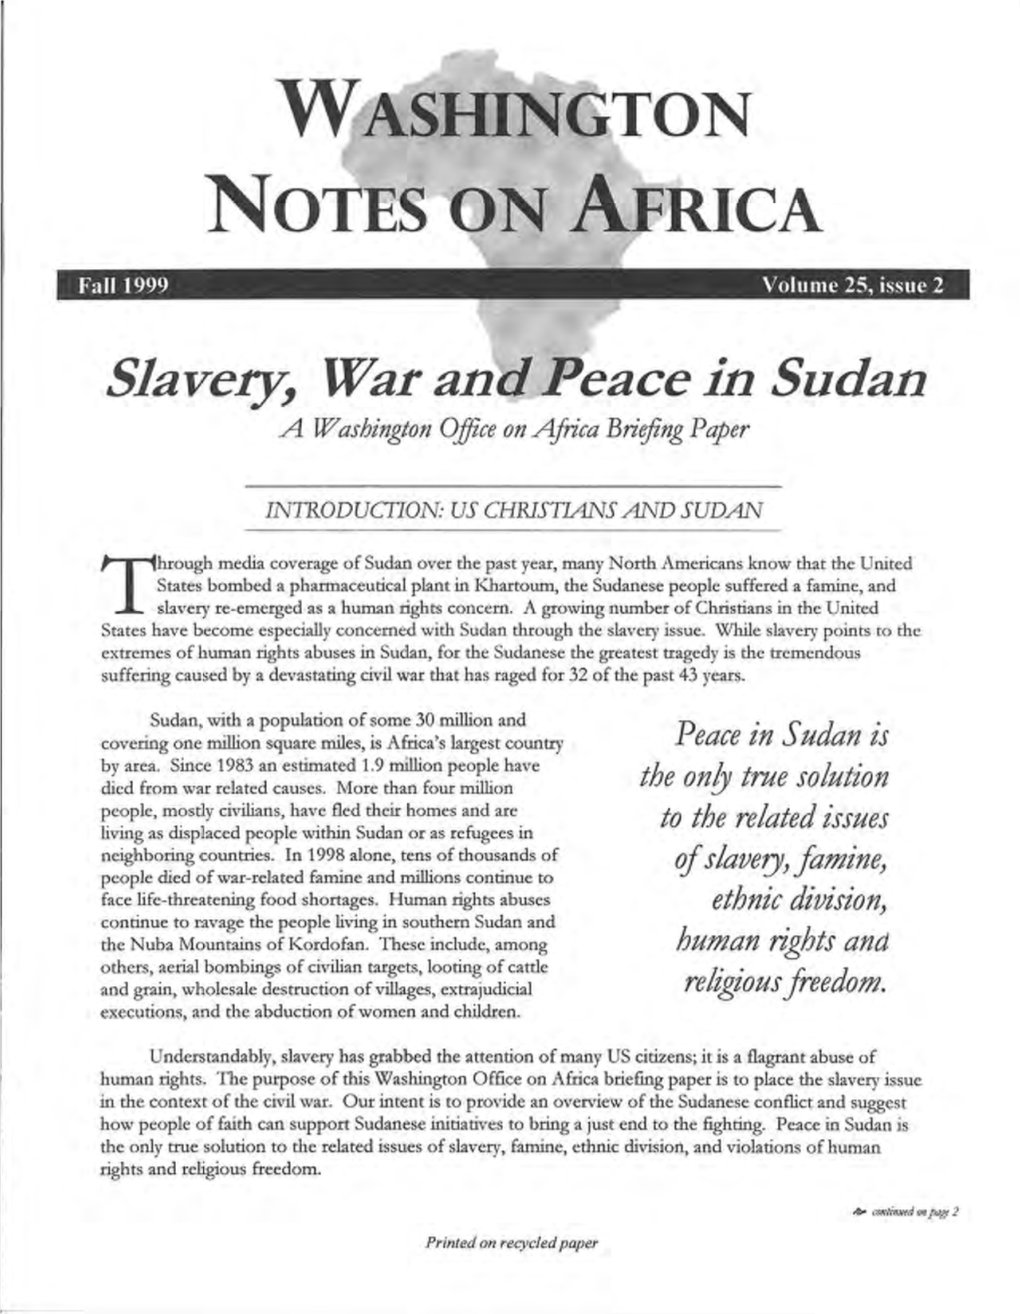 Slavery, War an Eace in Sudan a Washington Office on Africa Briefing Paper